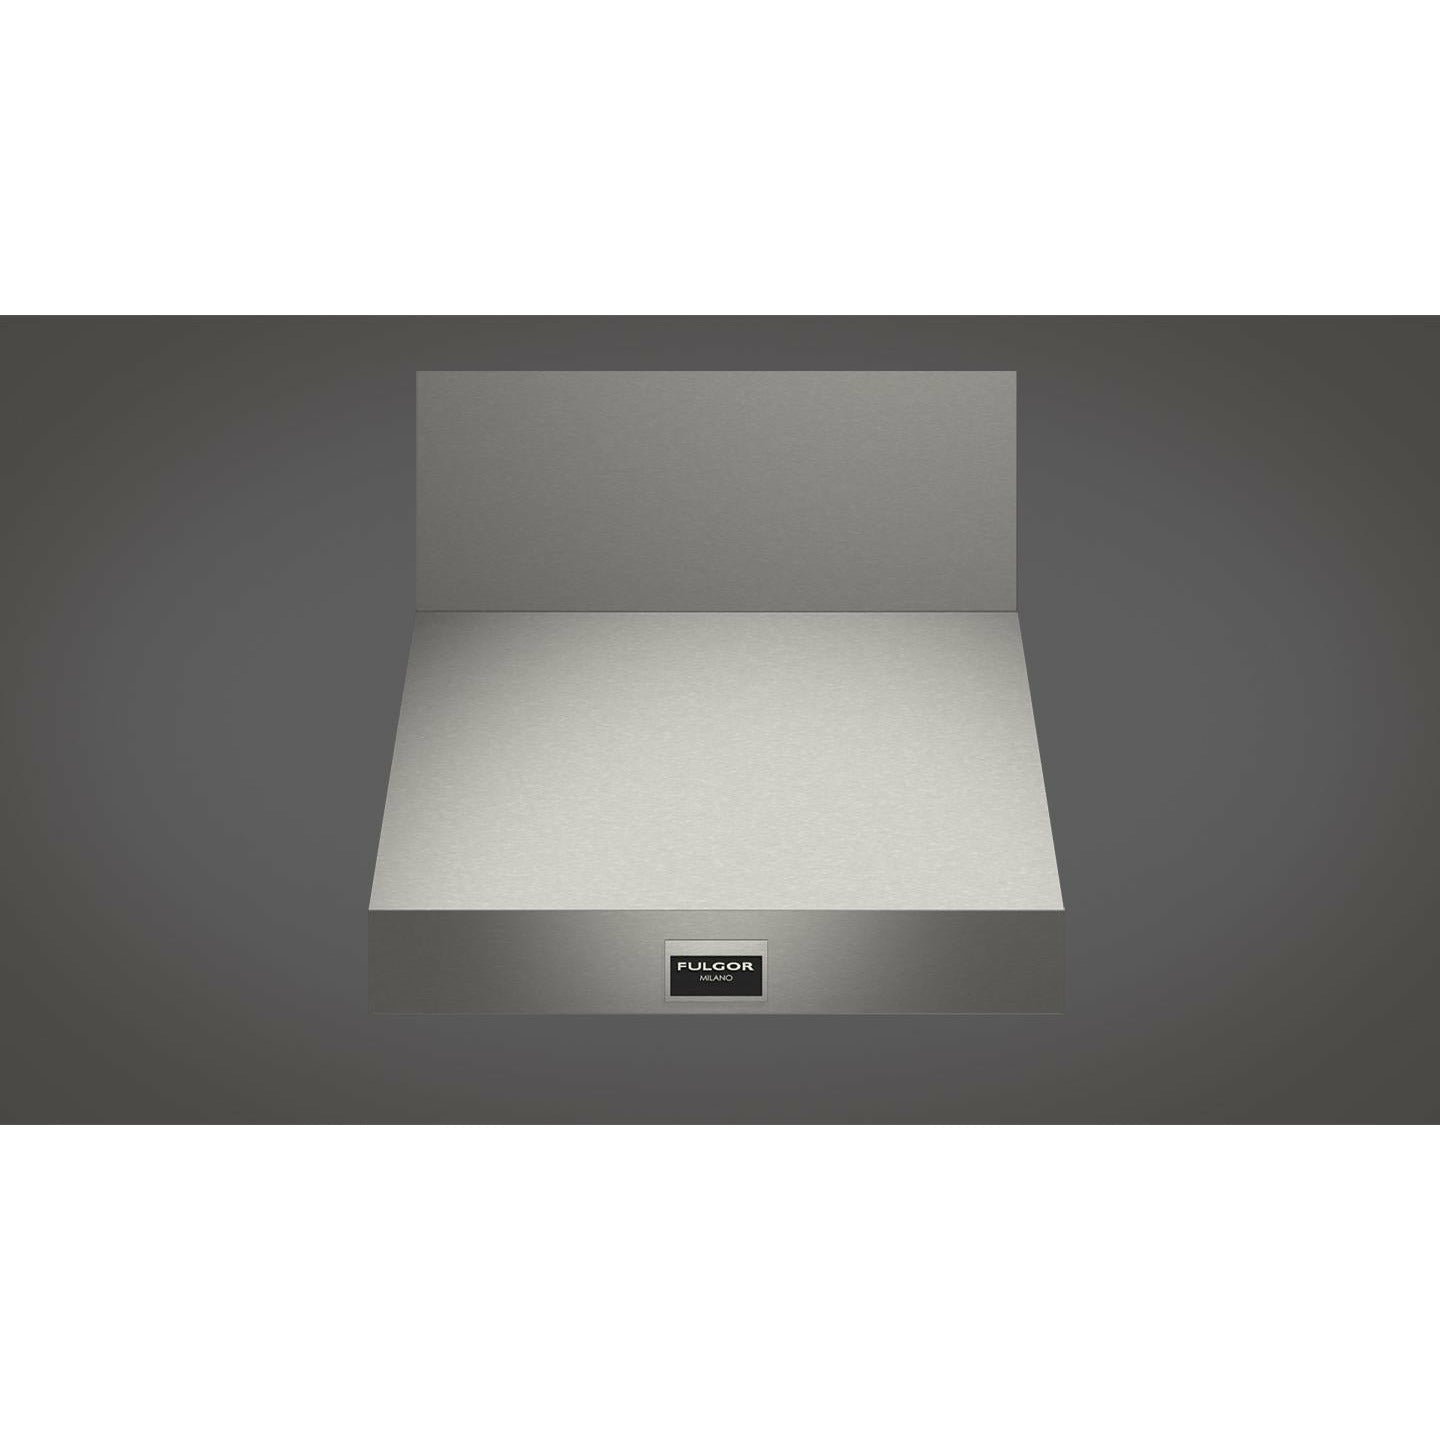 Fulgor Milano 30" Professional Wall Mount Hood with 600 CFM Internal Blower, Stainless Steel - F6PH30S1 Hoods F6PH30S1 Luxury Appliances Direct